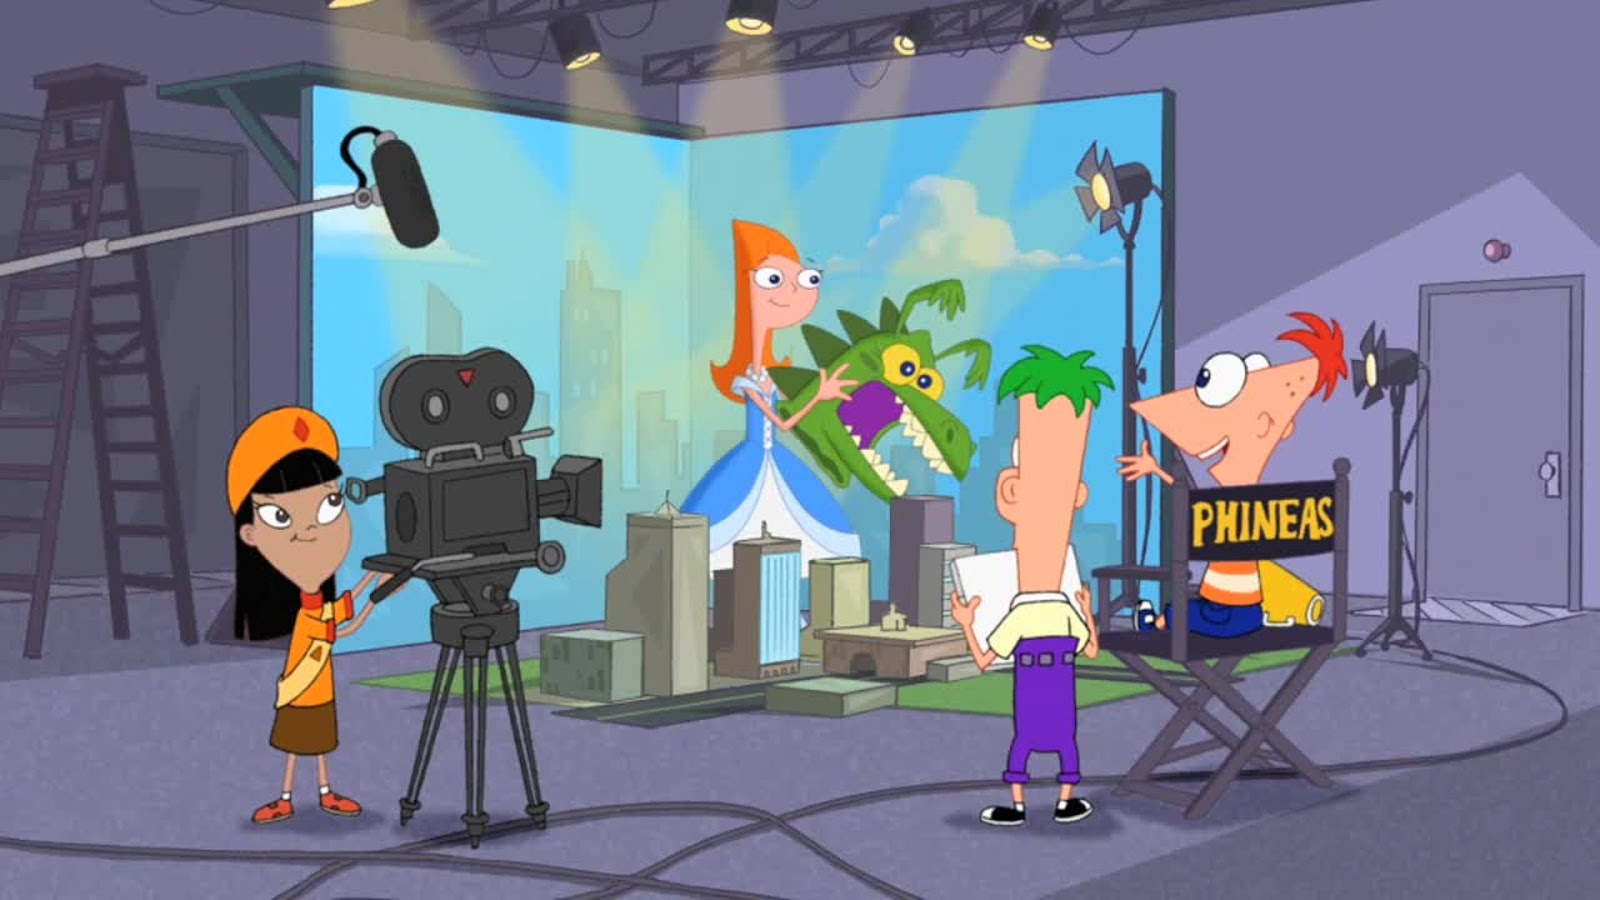 Phineas and ferb ytp